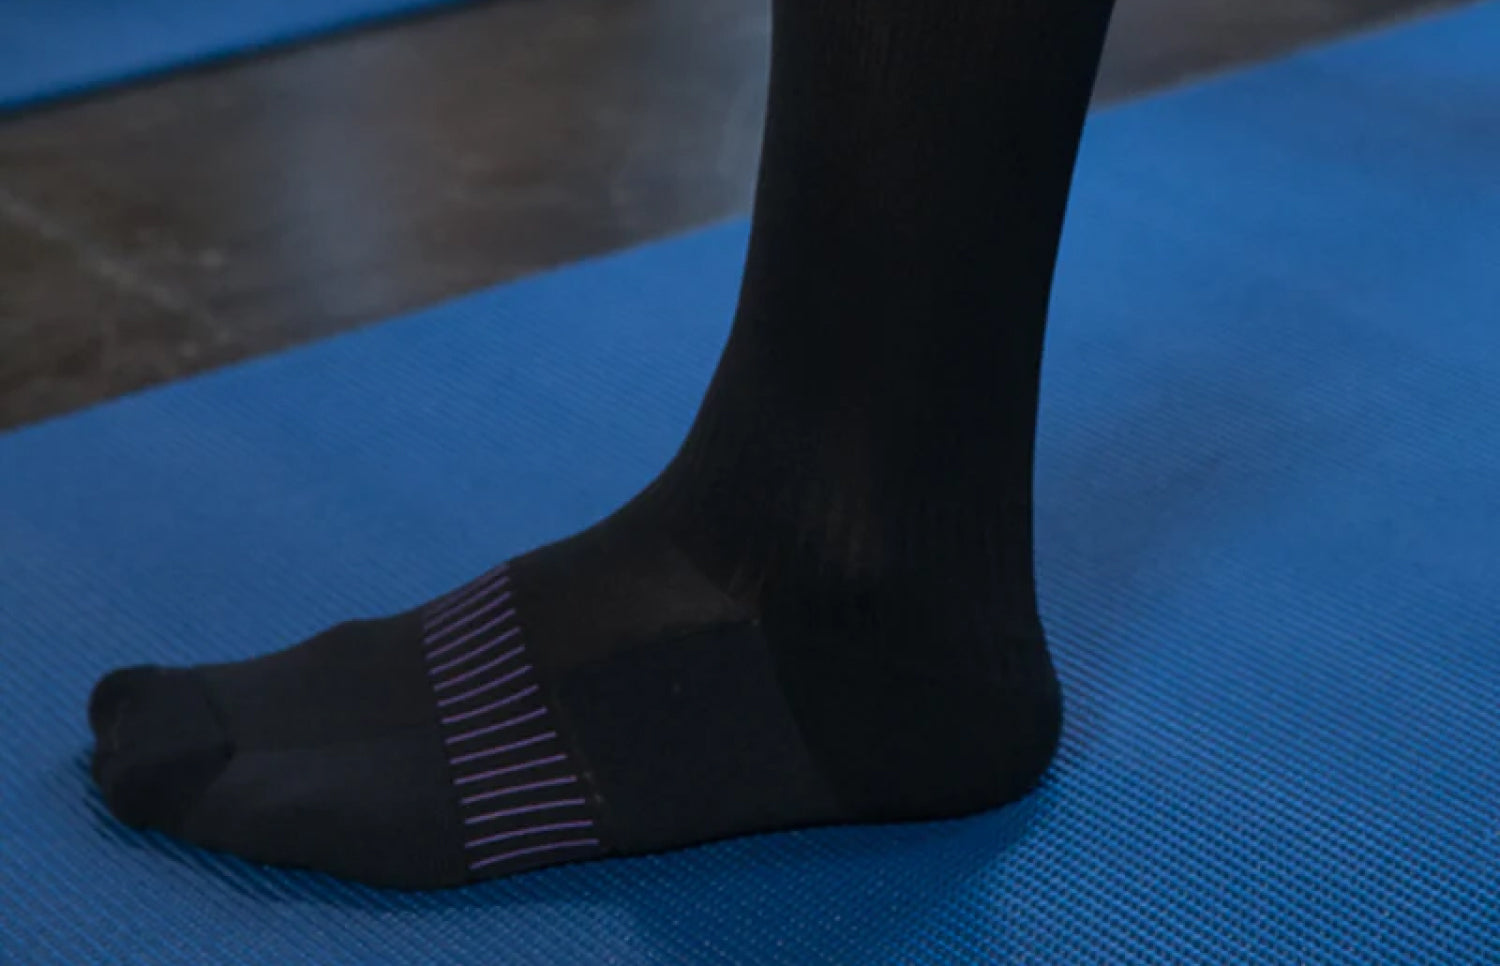 How And When Should You Wear Compression Socks?